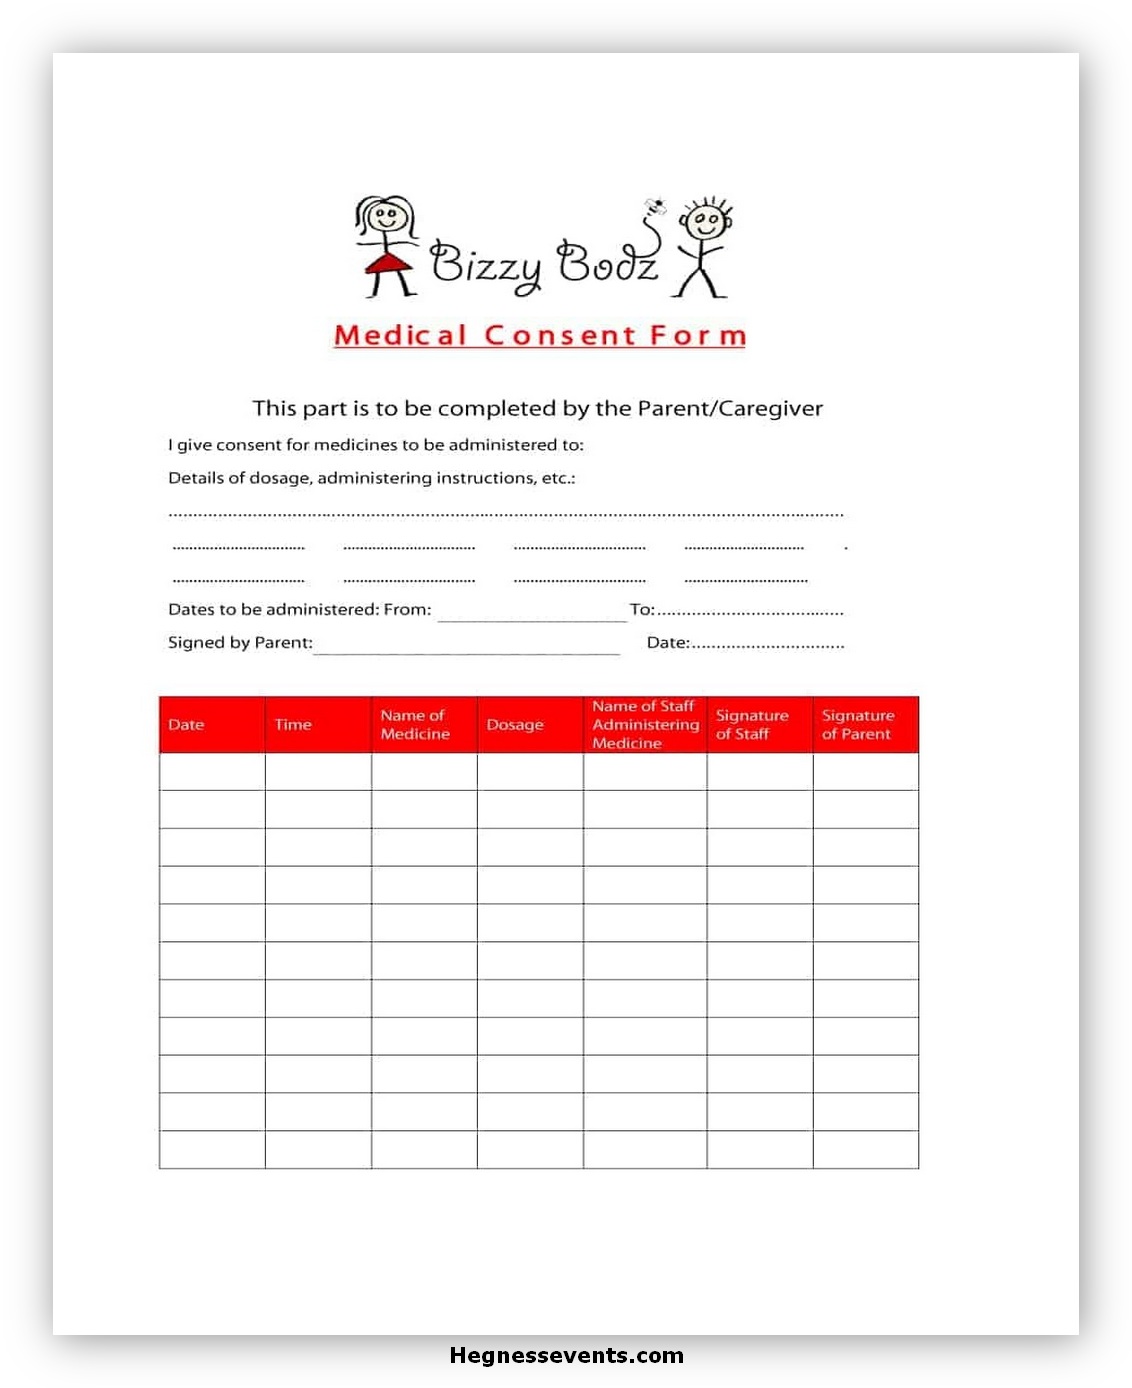 Medical Consent Form for A Child 01